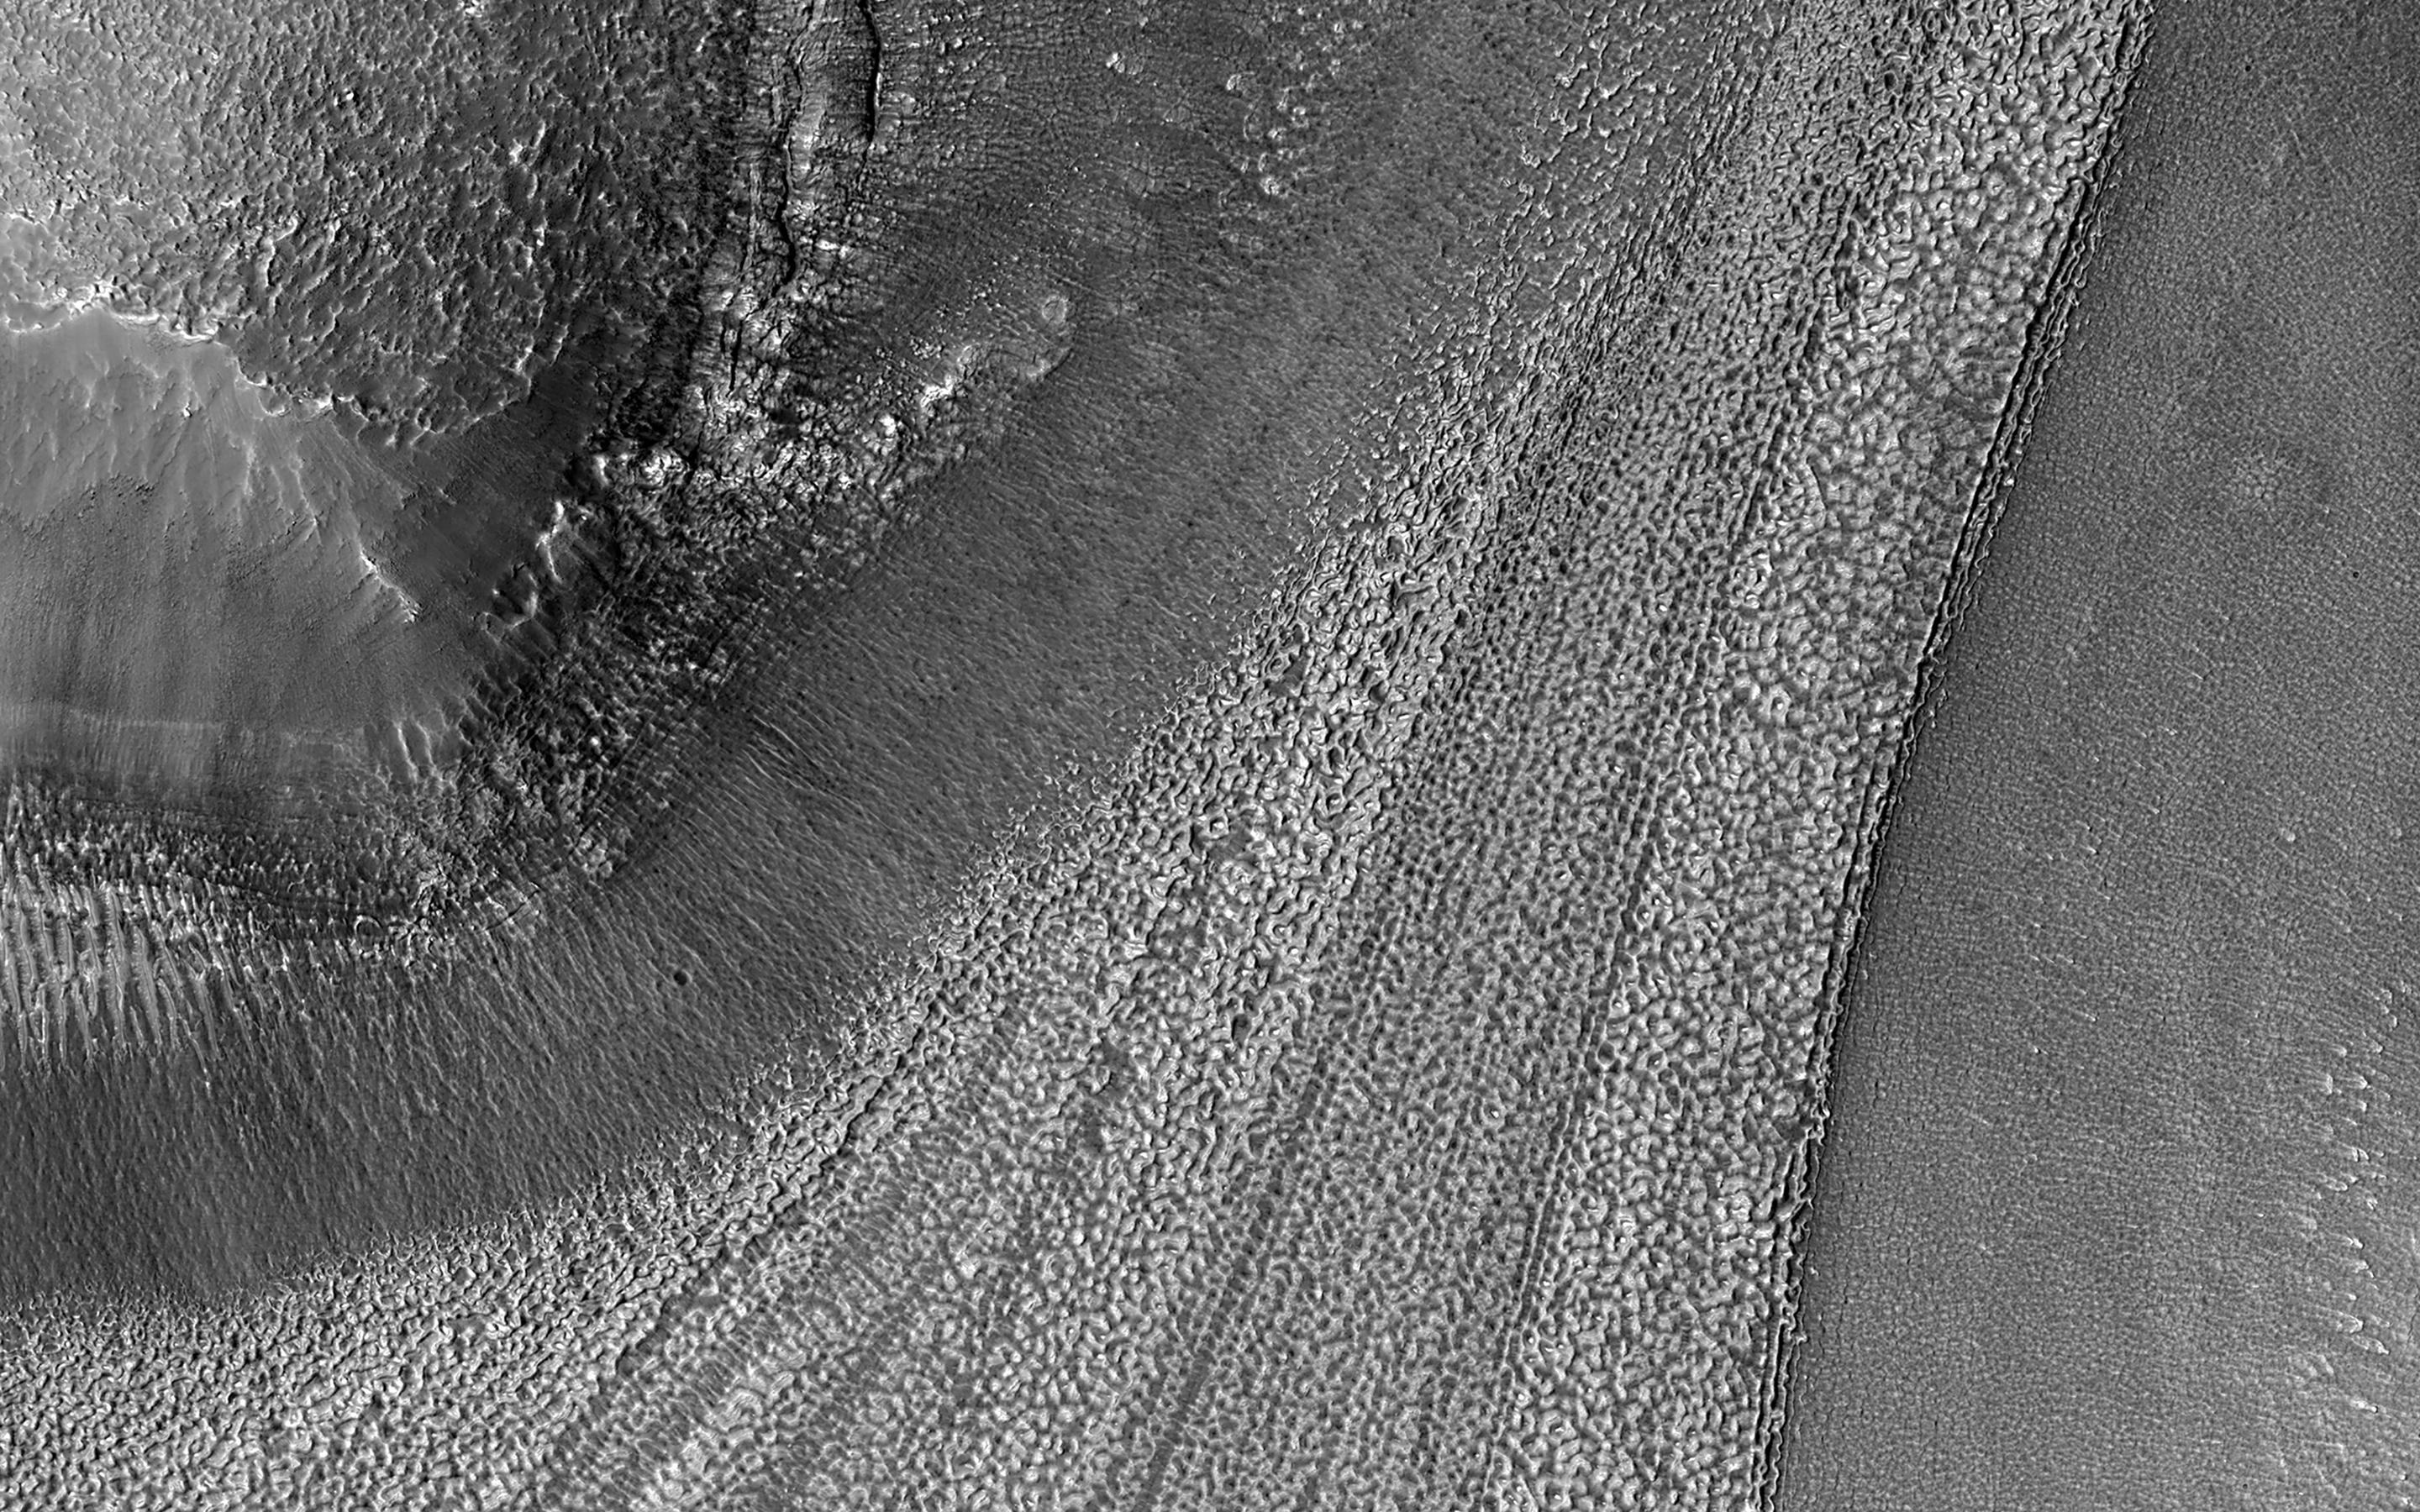 A black and white image of a portion of Mars' surface from above. Ridges stretch from top right to the bottom, the result of ice moving over possibly thousands of years. The glacier-like forms left behind have a mottled appearance.